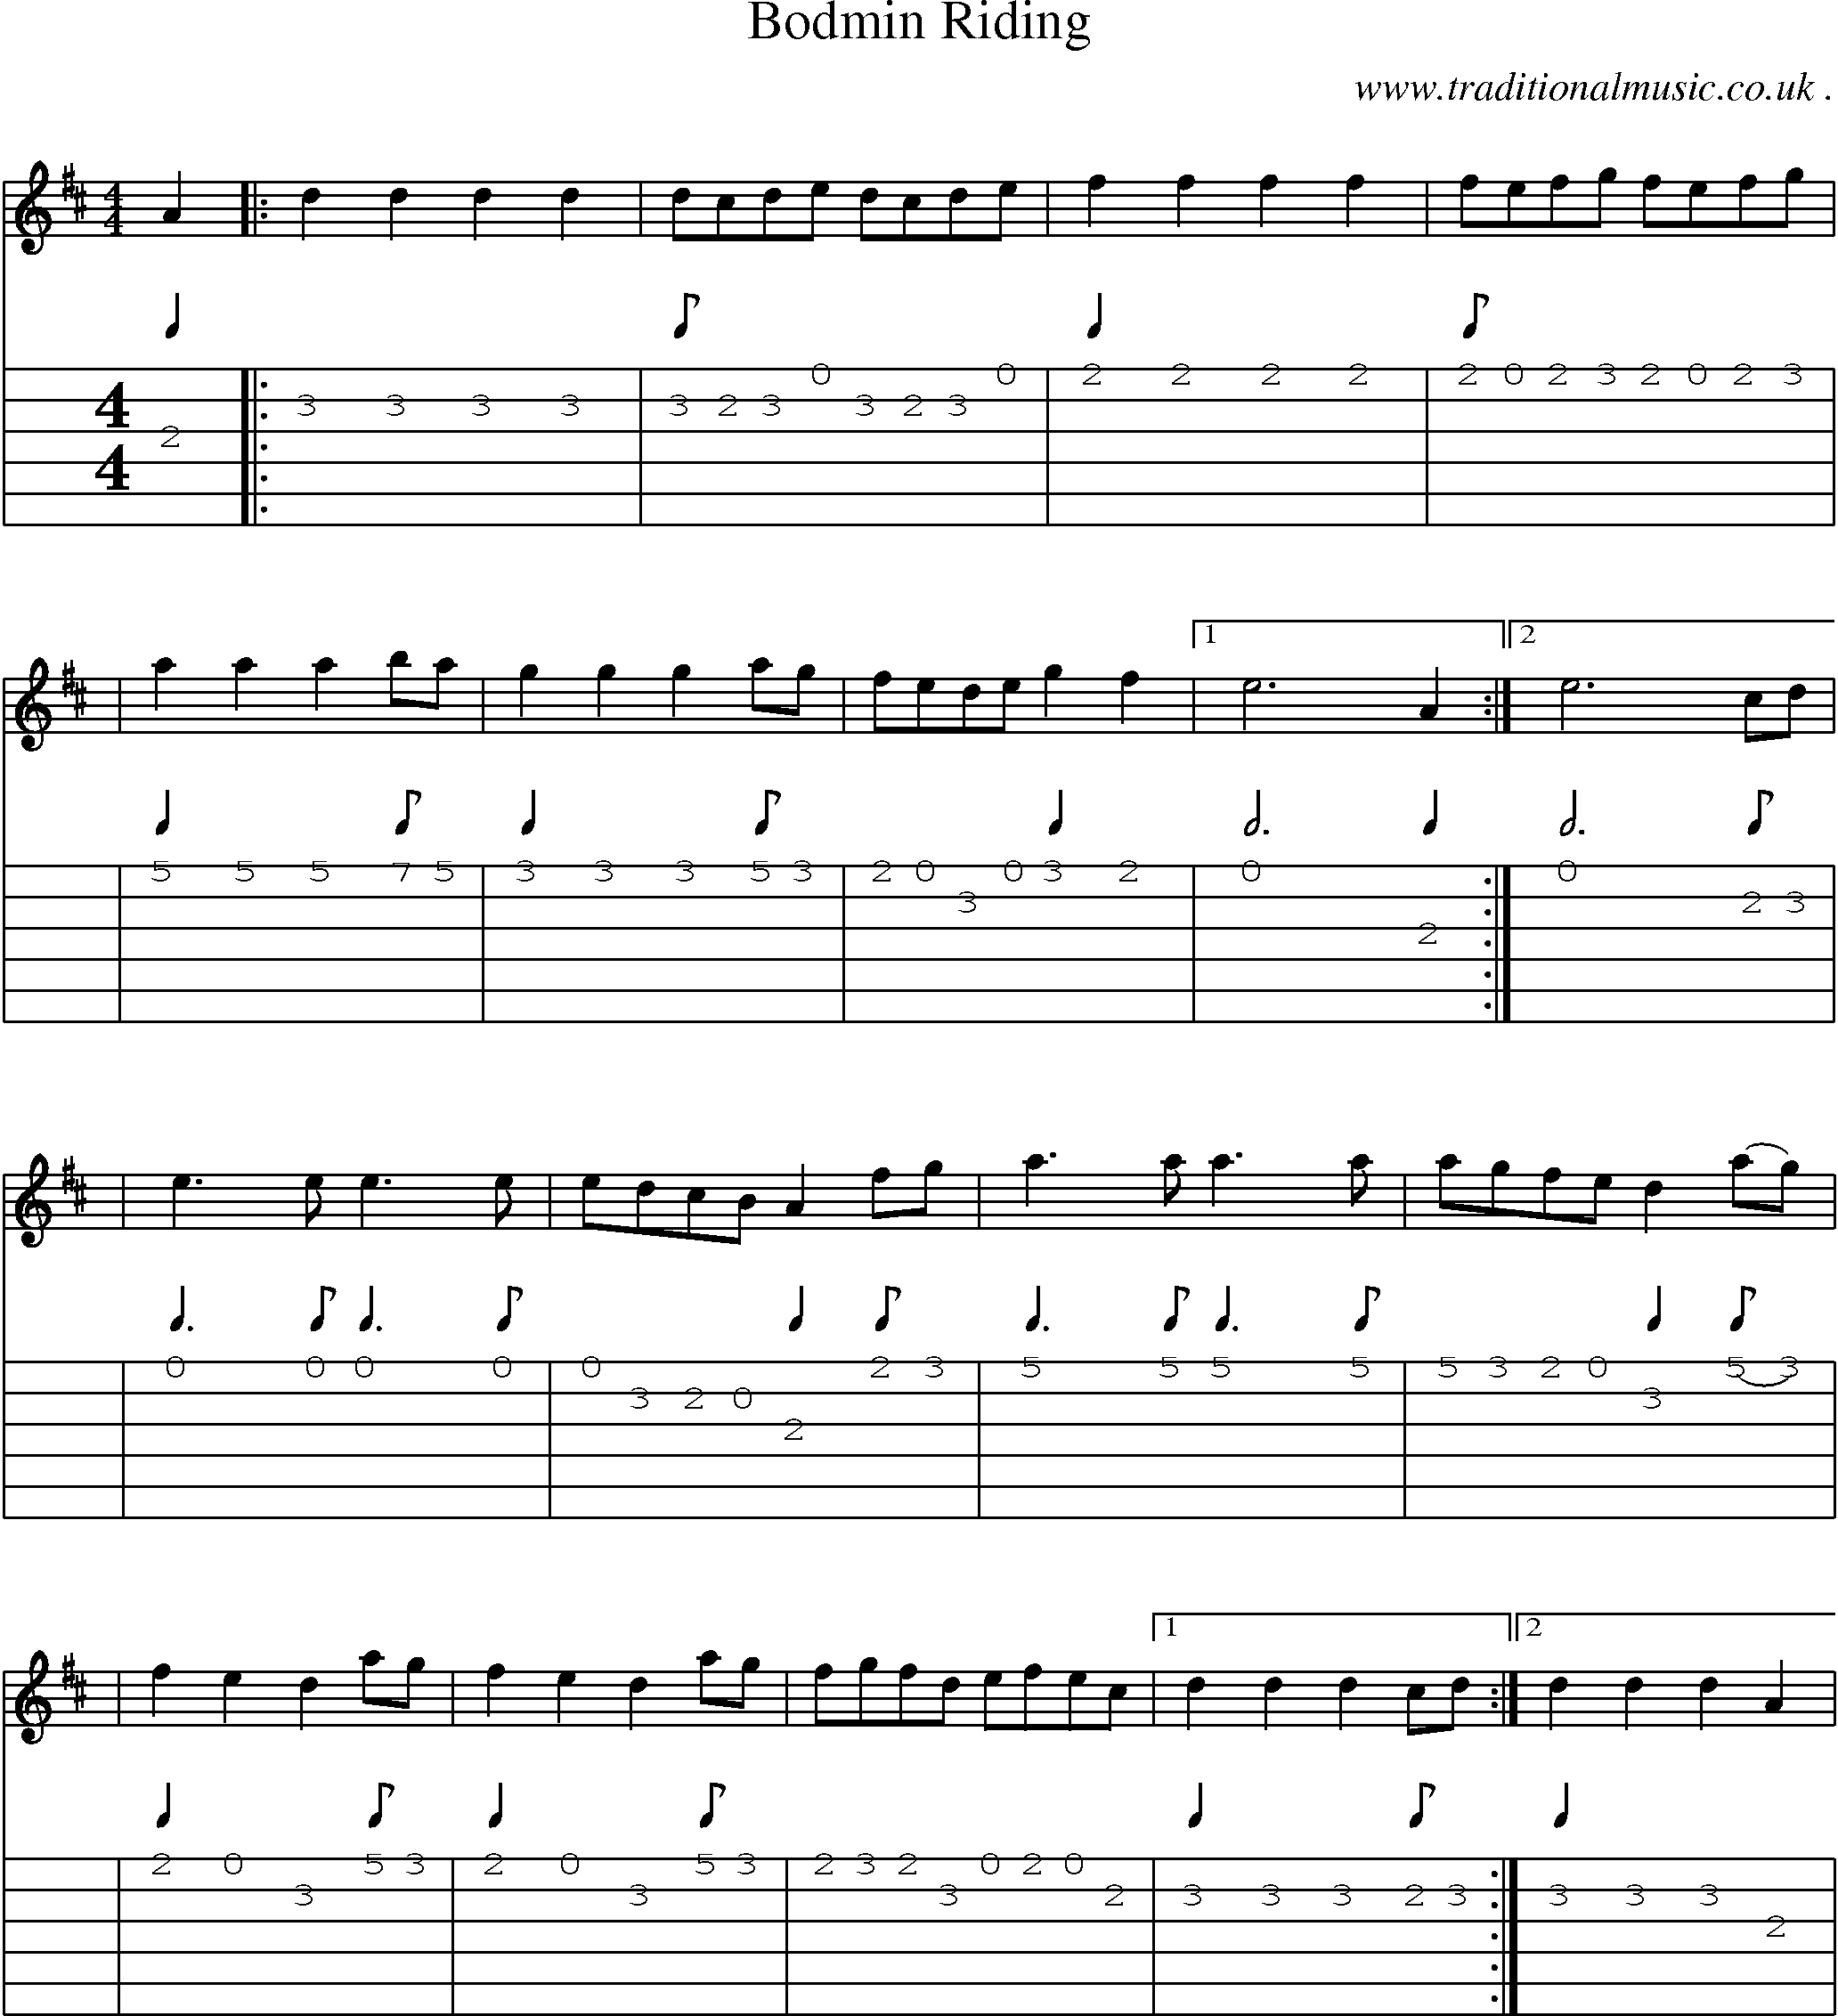 Sheet-Music and Guitar Tabs for Bodmin Riding